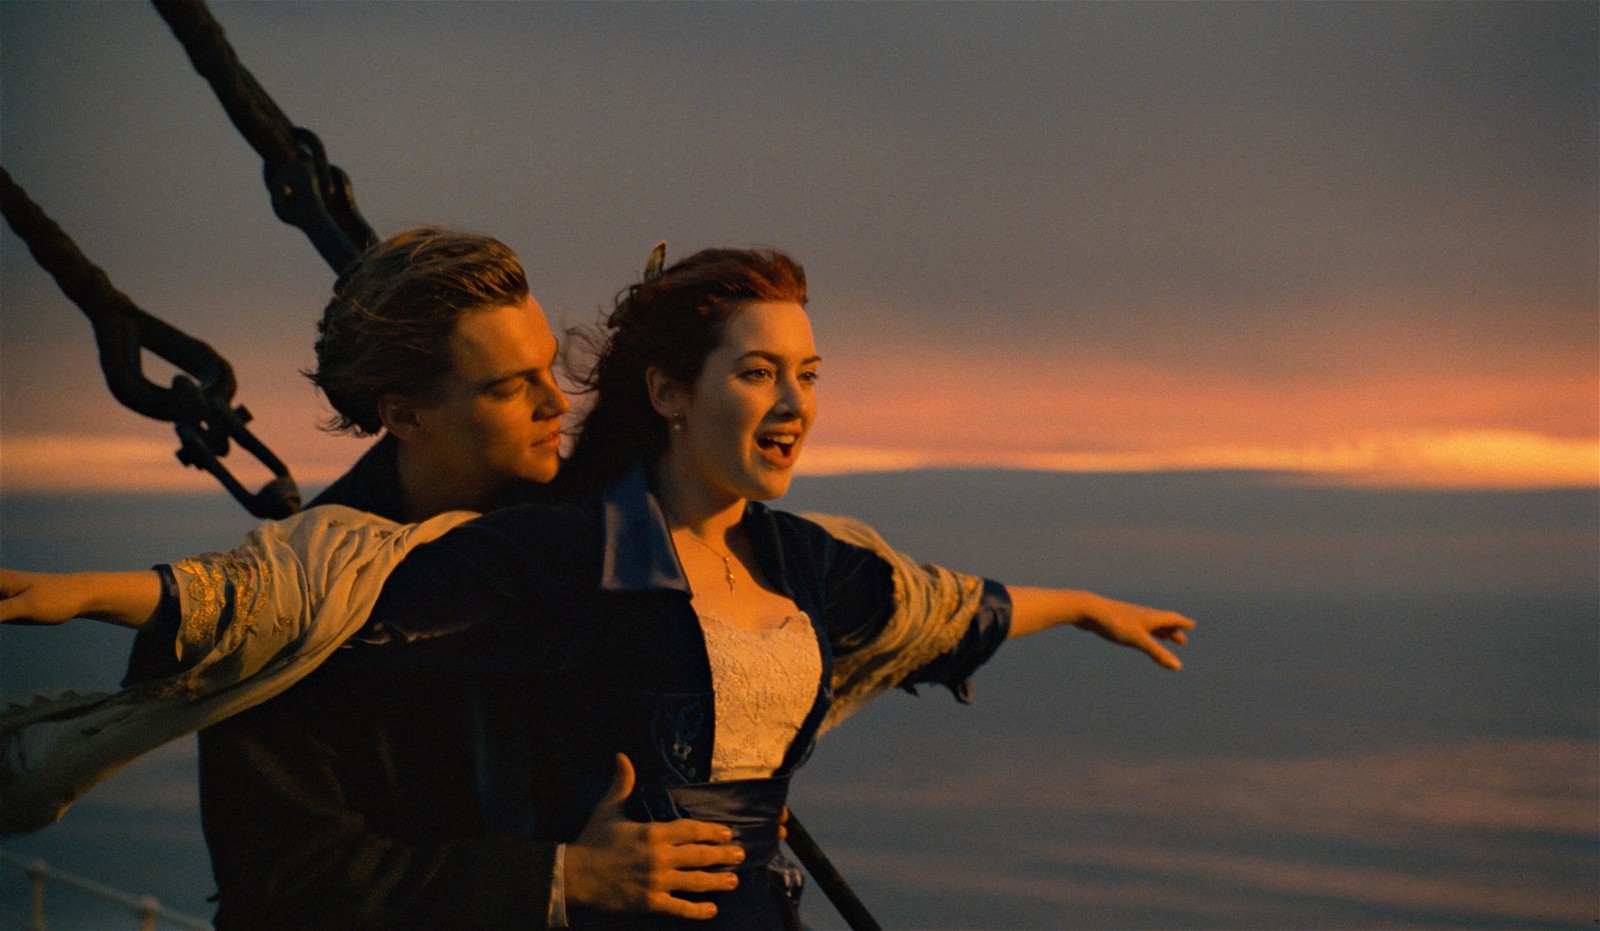 A still of Kate Winslet and Leonardo DiCaprio from Titanic (1997)